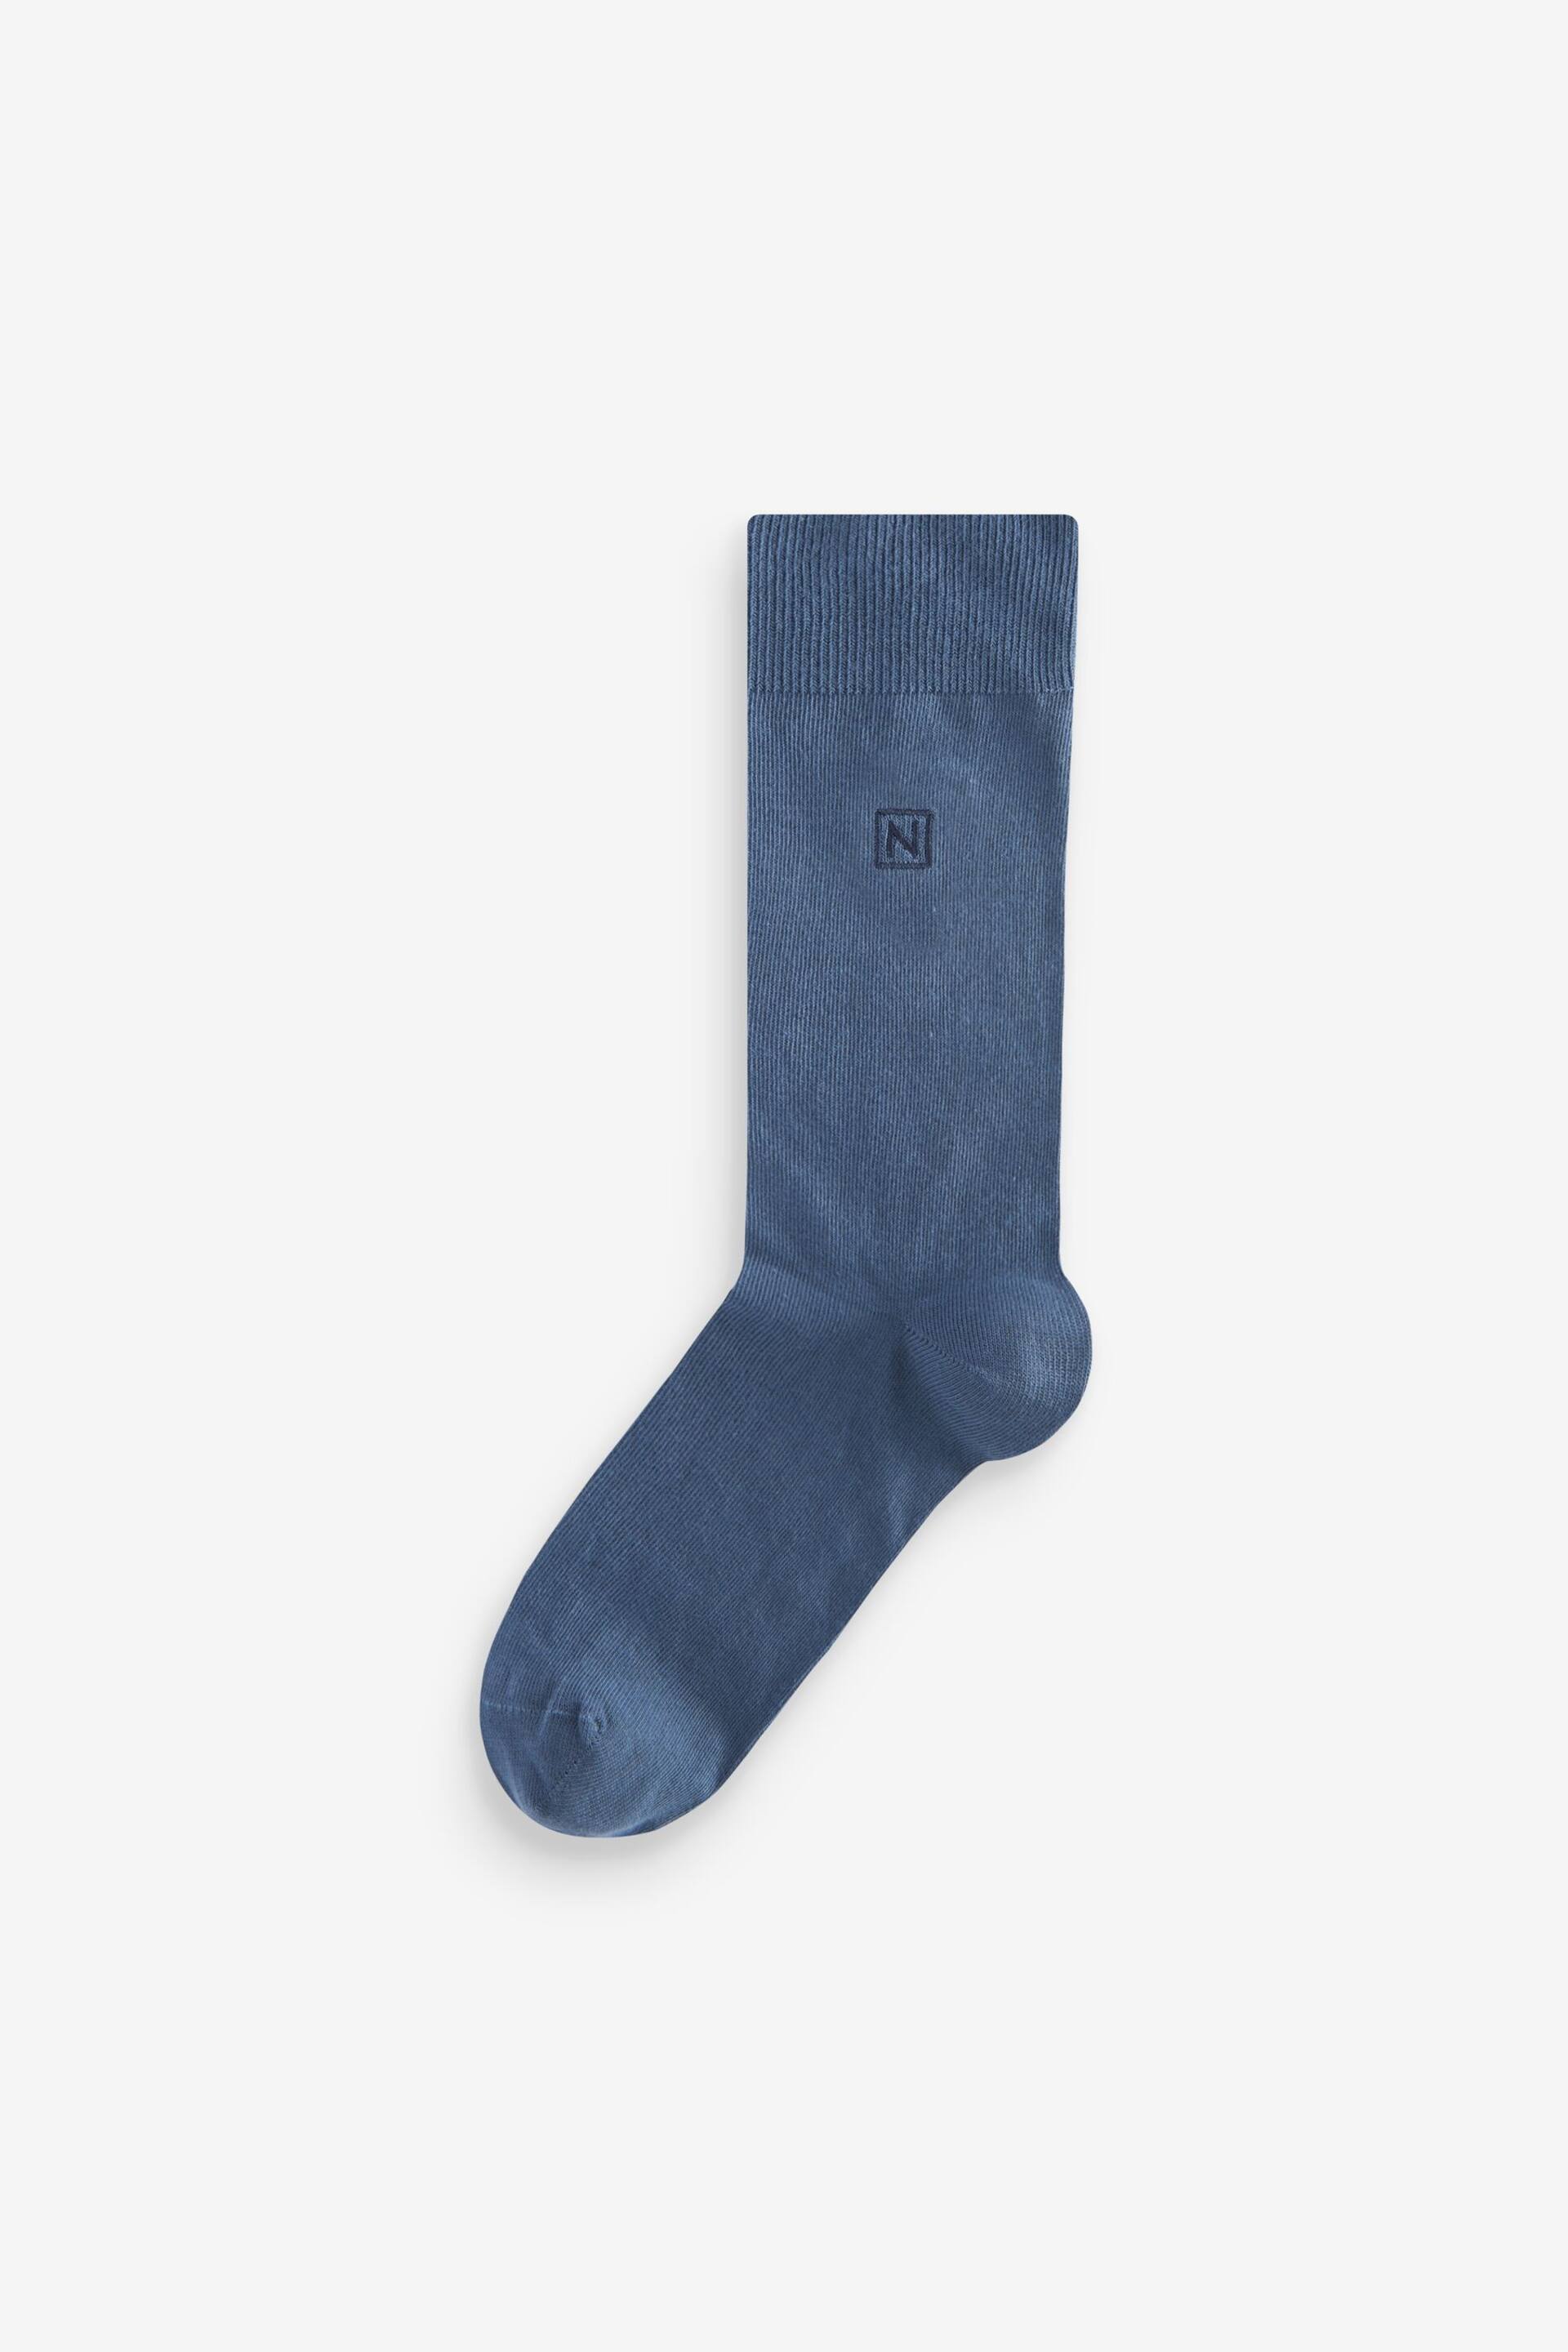 Blue/Grey/Green/Red 8 Pack Embroidered Lasting Fresh Socks - Image 7 of 9